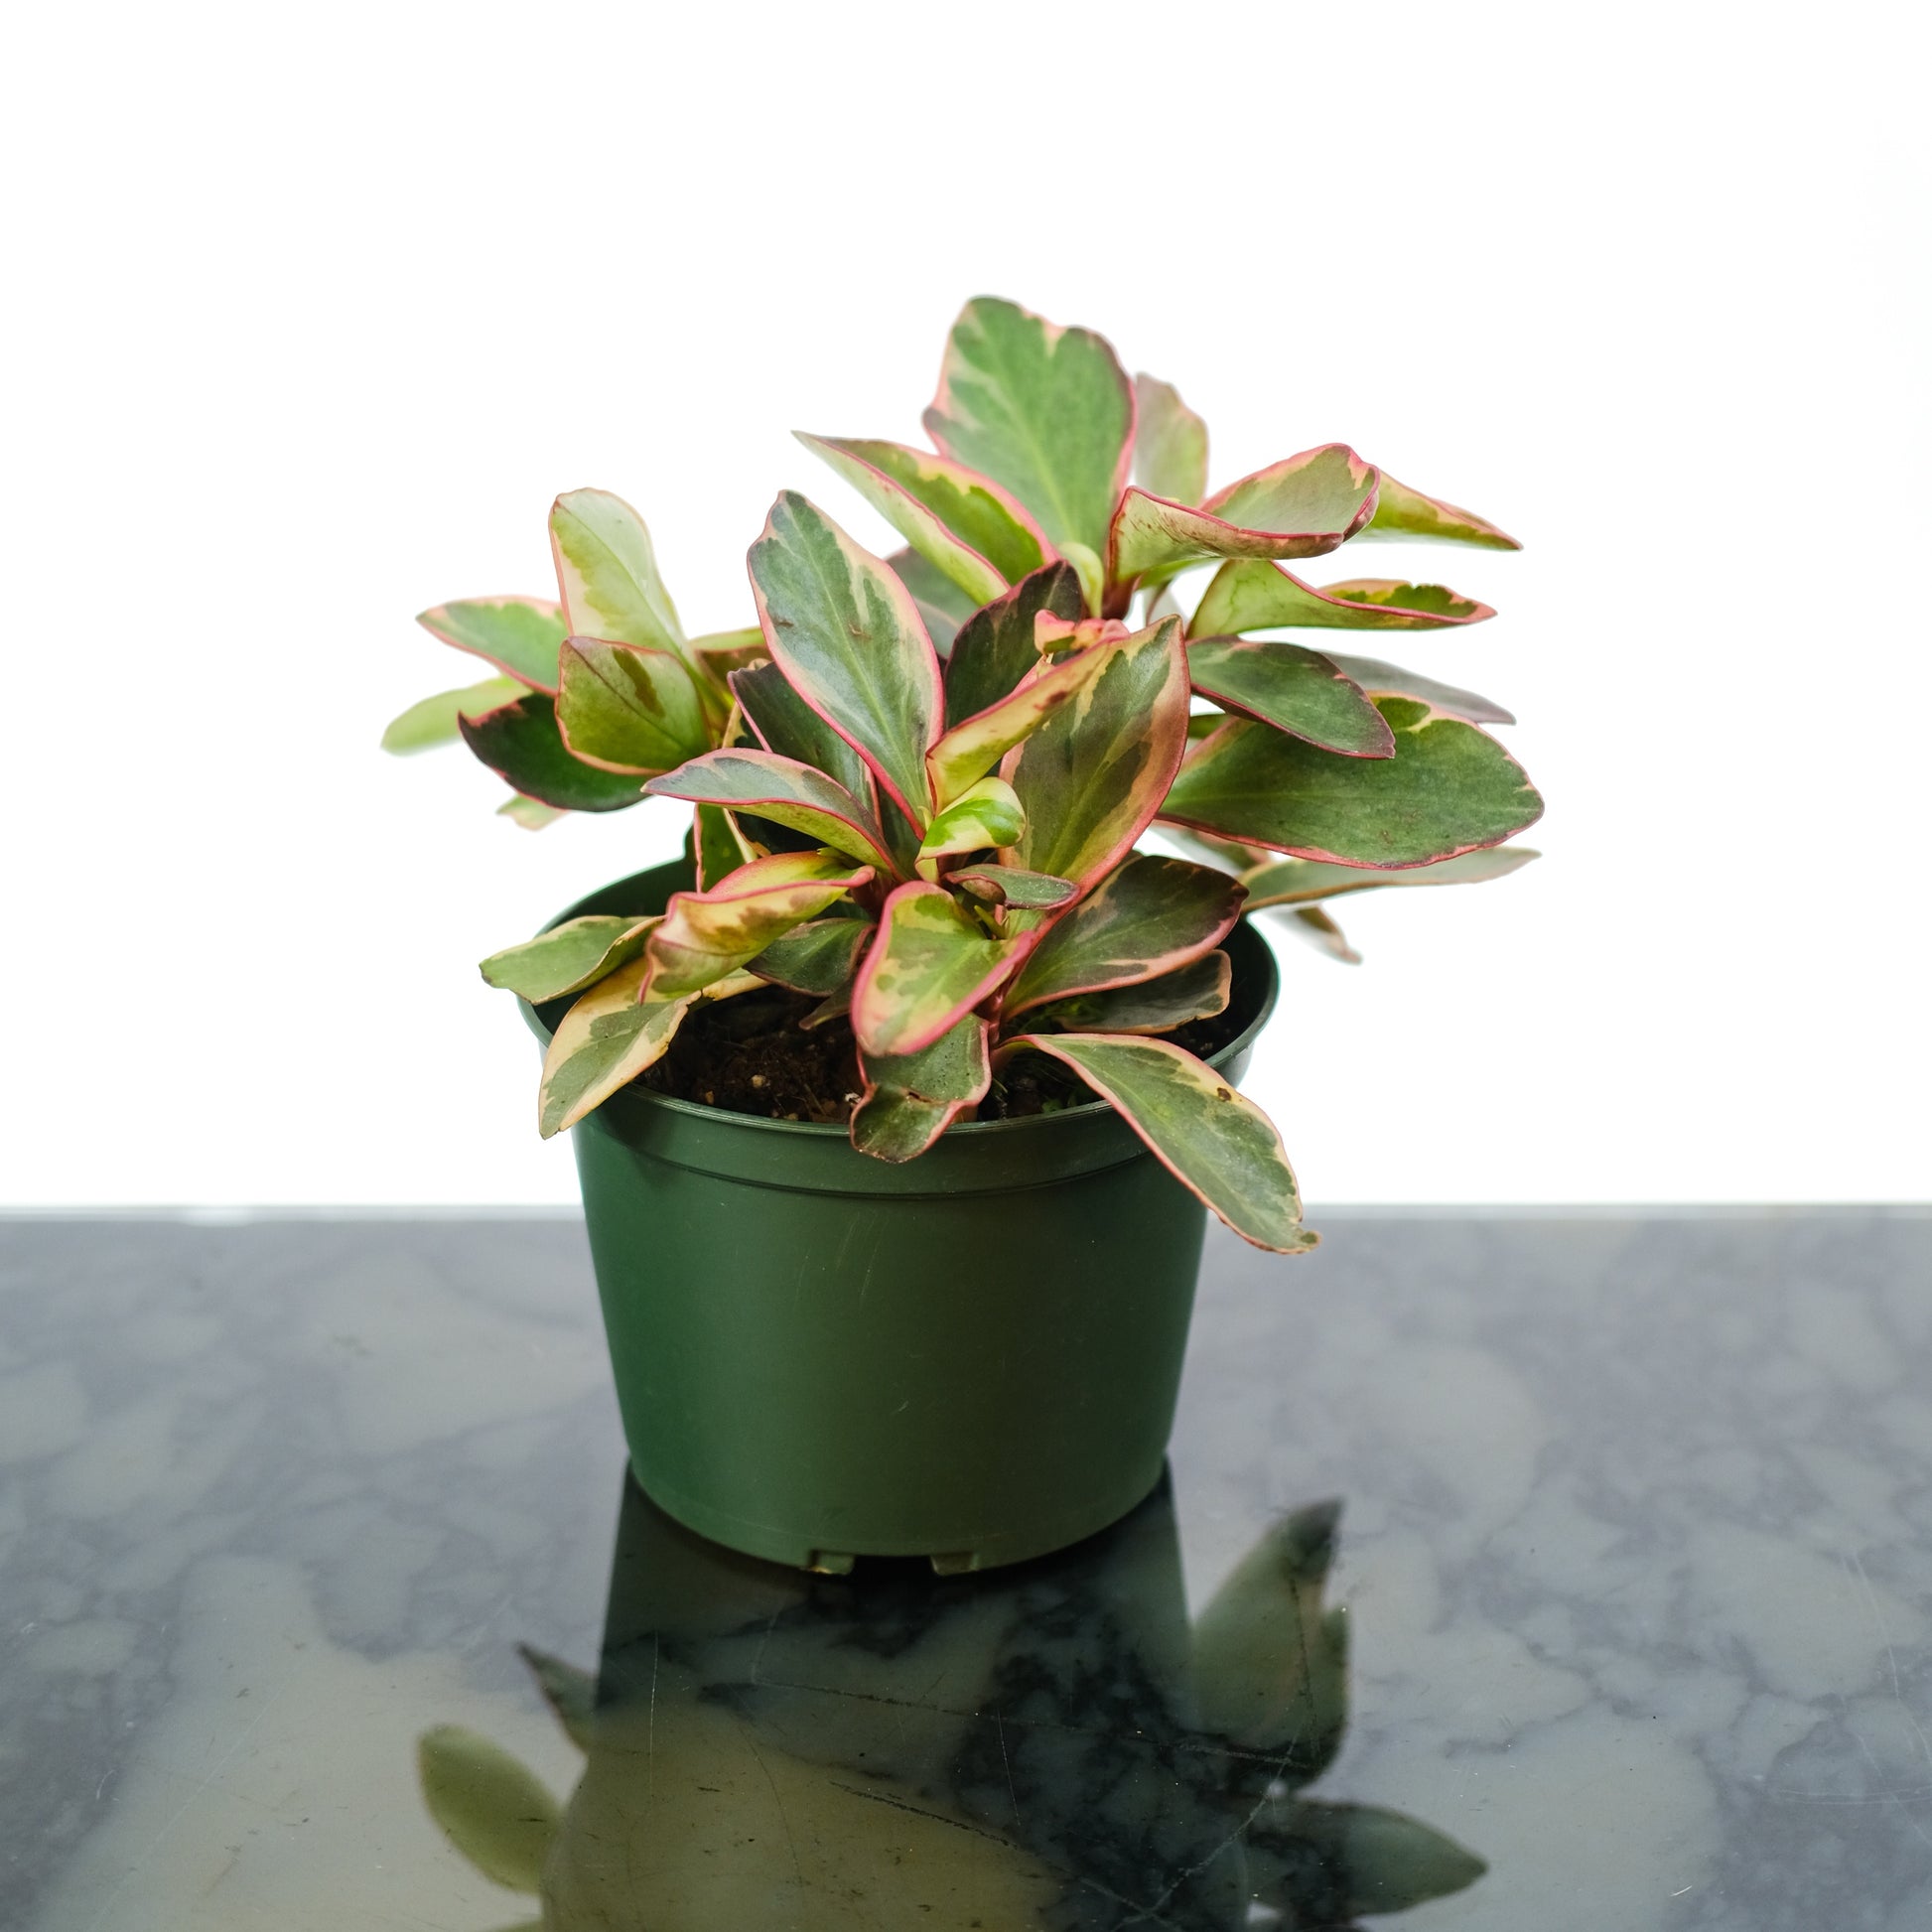 Tricolor Peperomia (Peperomia clusiifolia) in a 6 inch pot. Indoor plant for sale by Promise Supply for delivery and pickup in Toronto